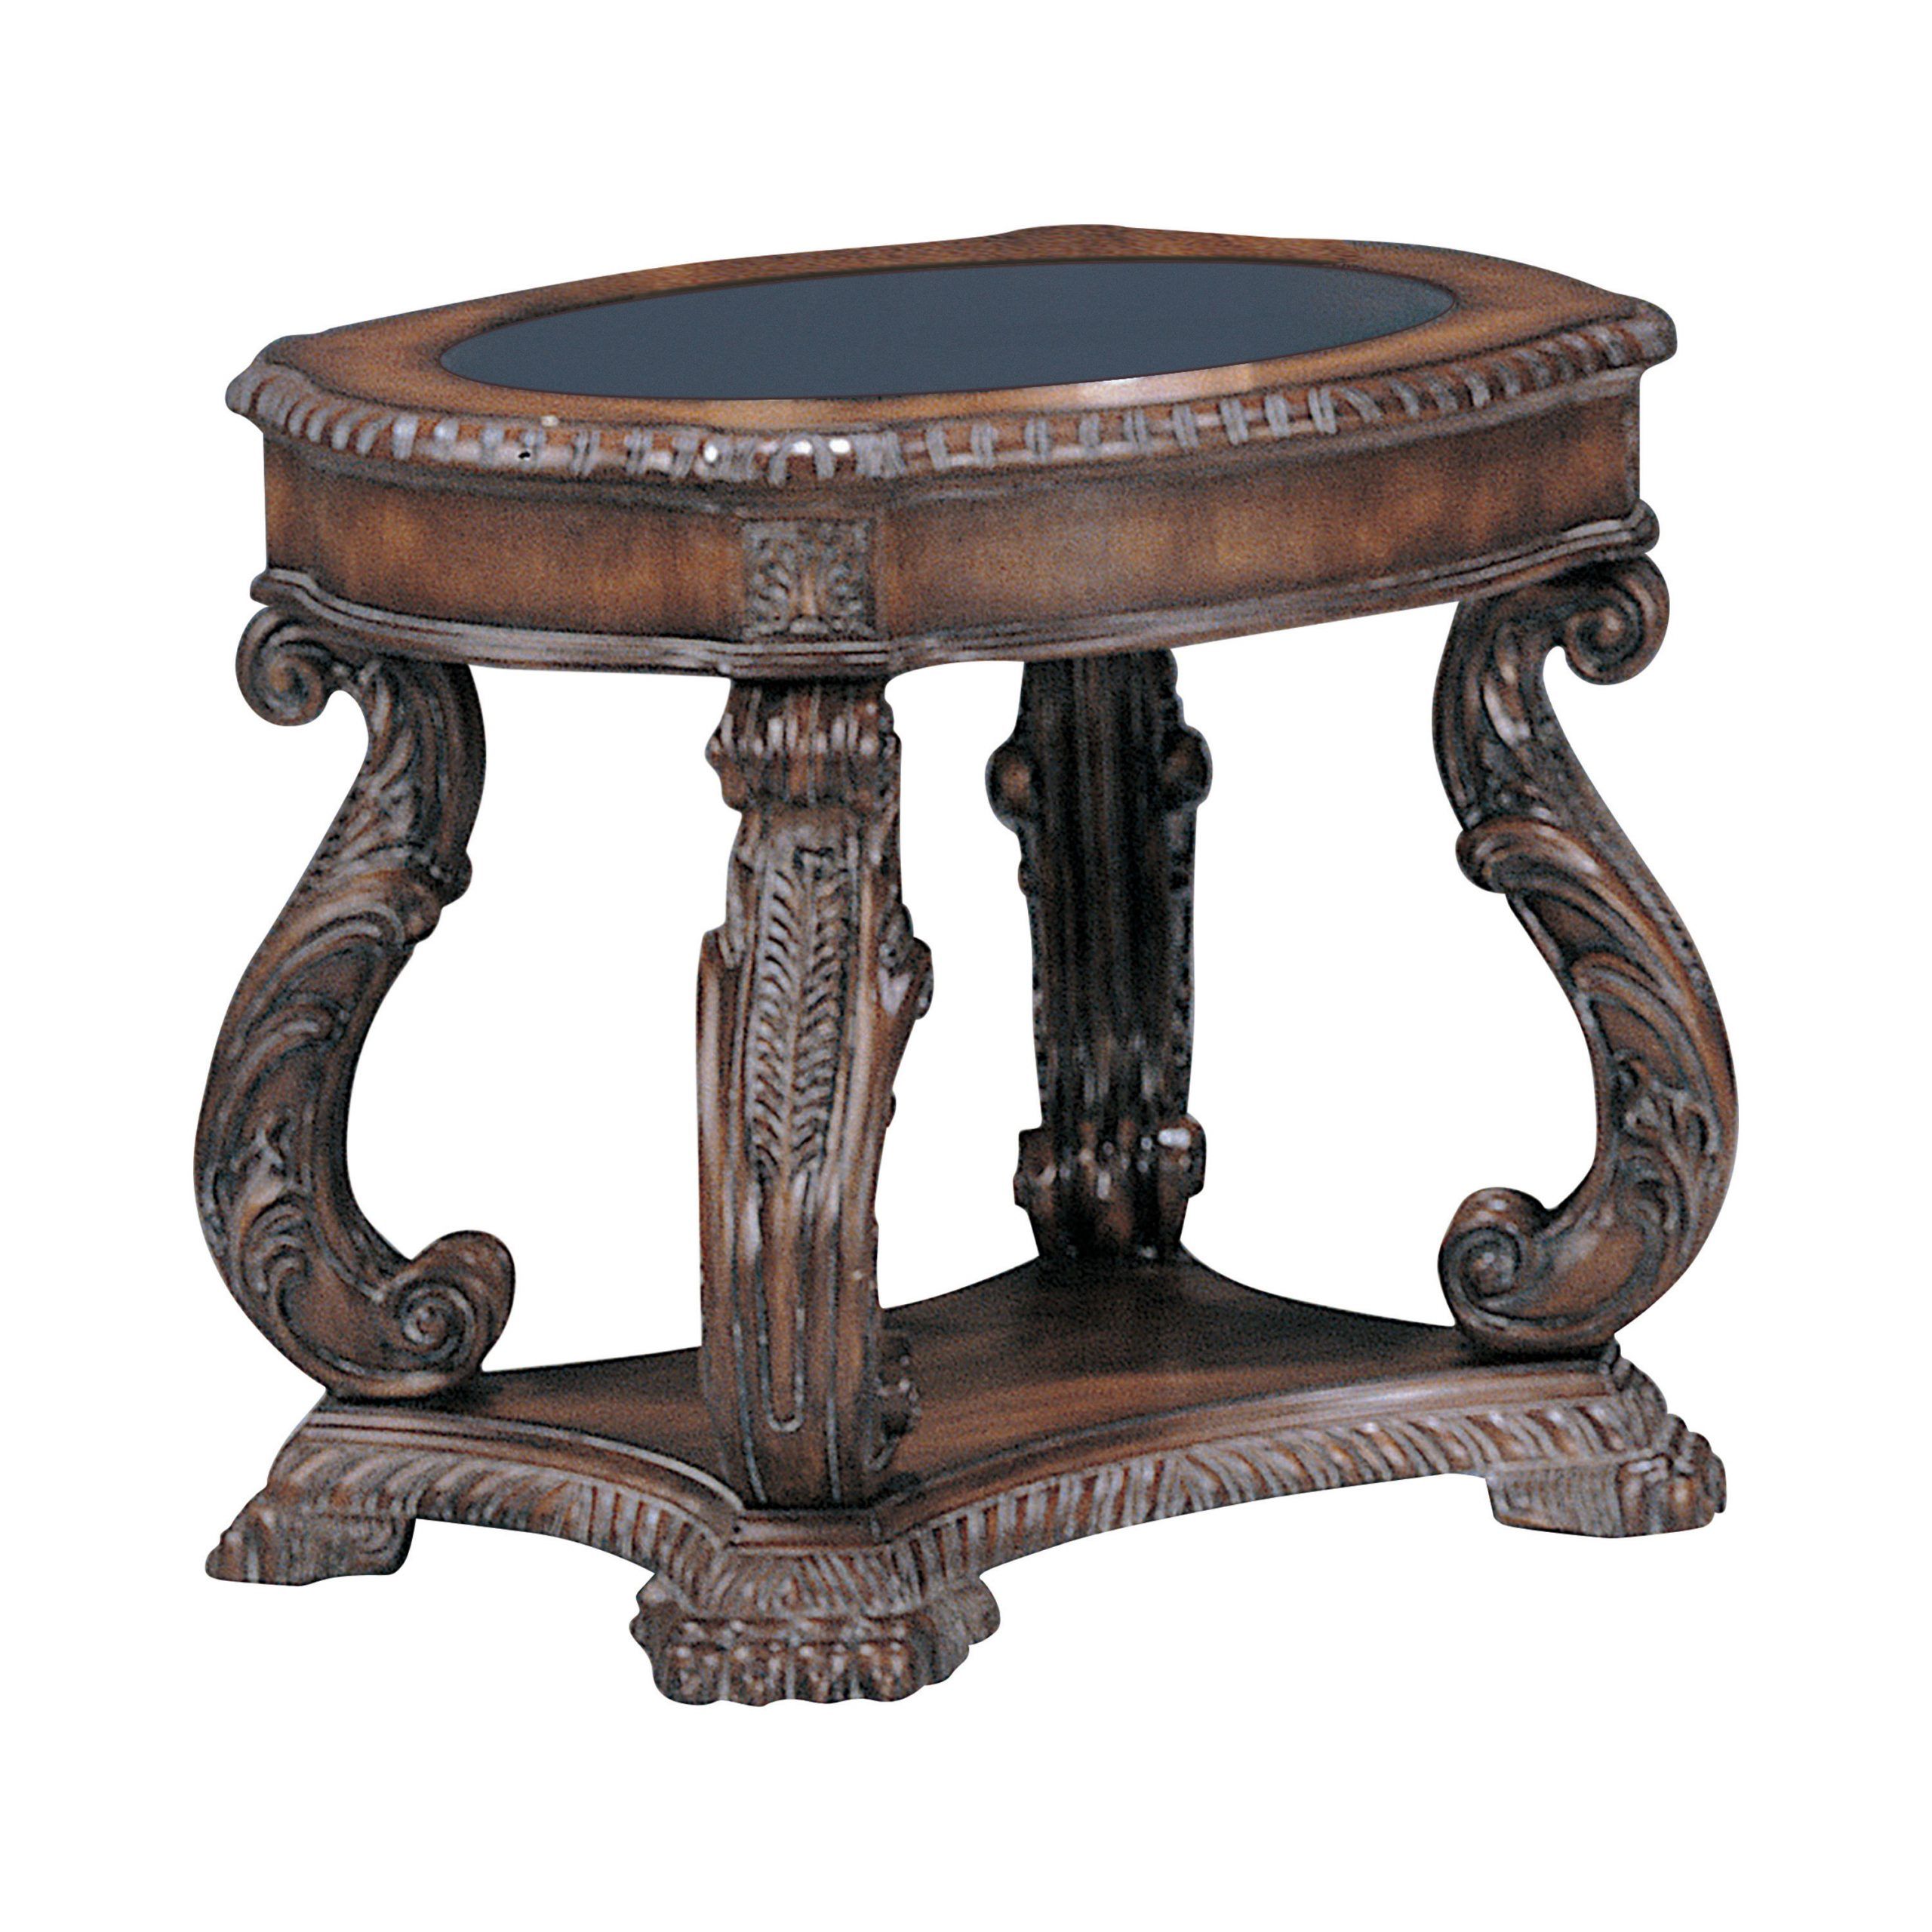 Coaster Furniture Antique Brown Wood Round End Table | The Classy Home Intended For Antique Brown 2 Door Wood Desks (View 15 of 15)